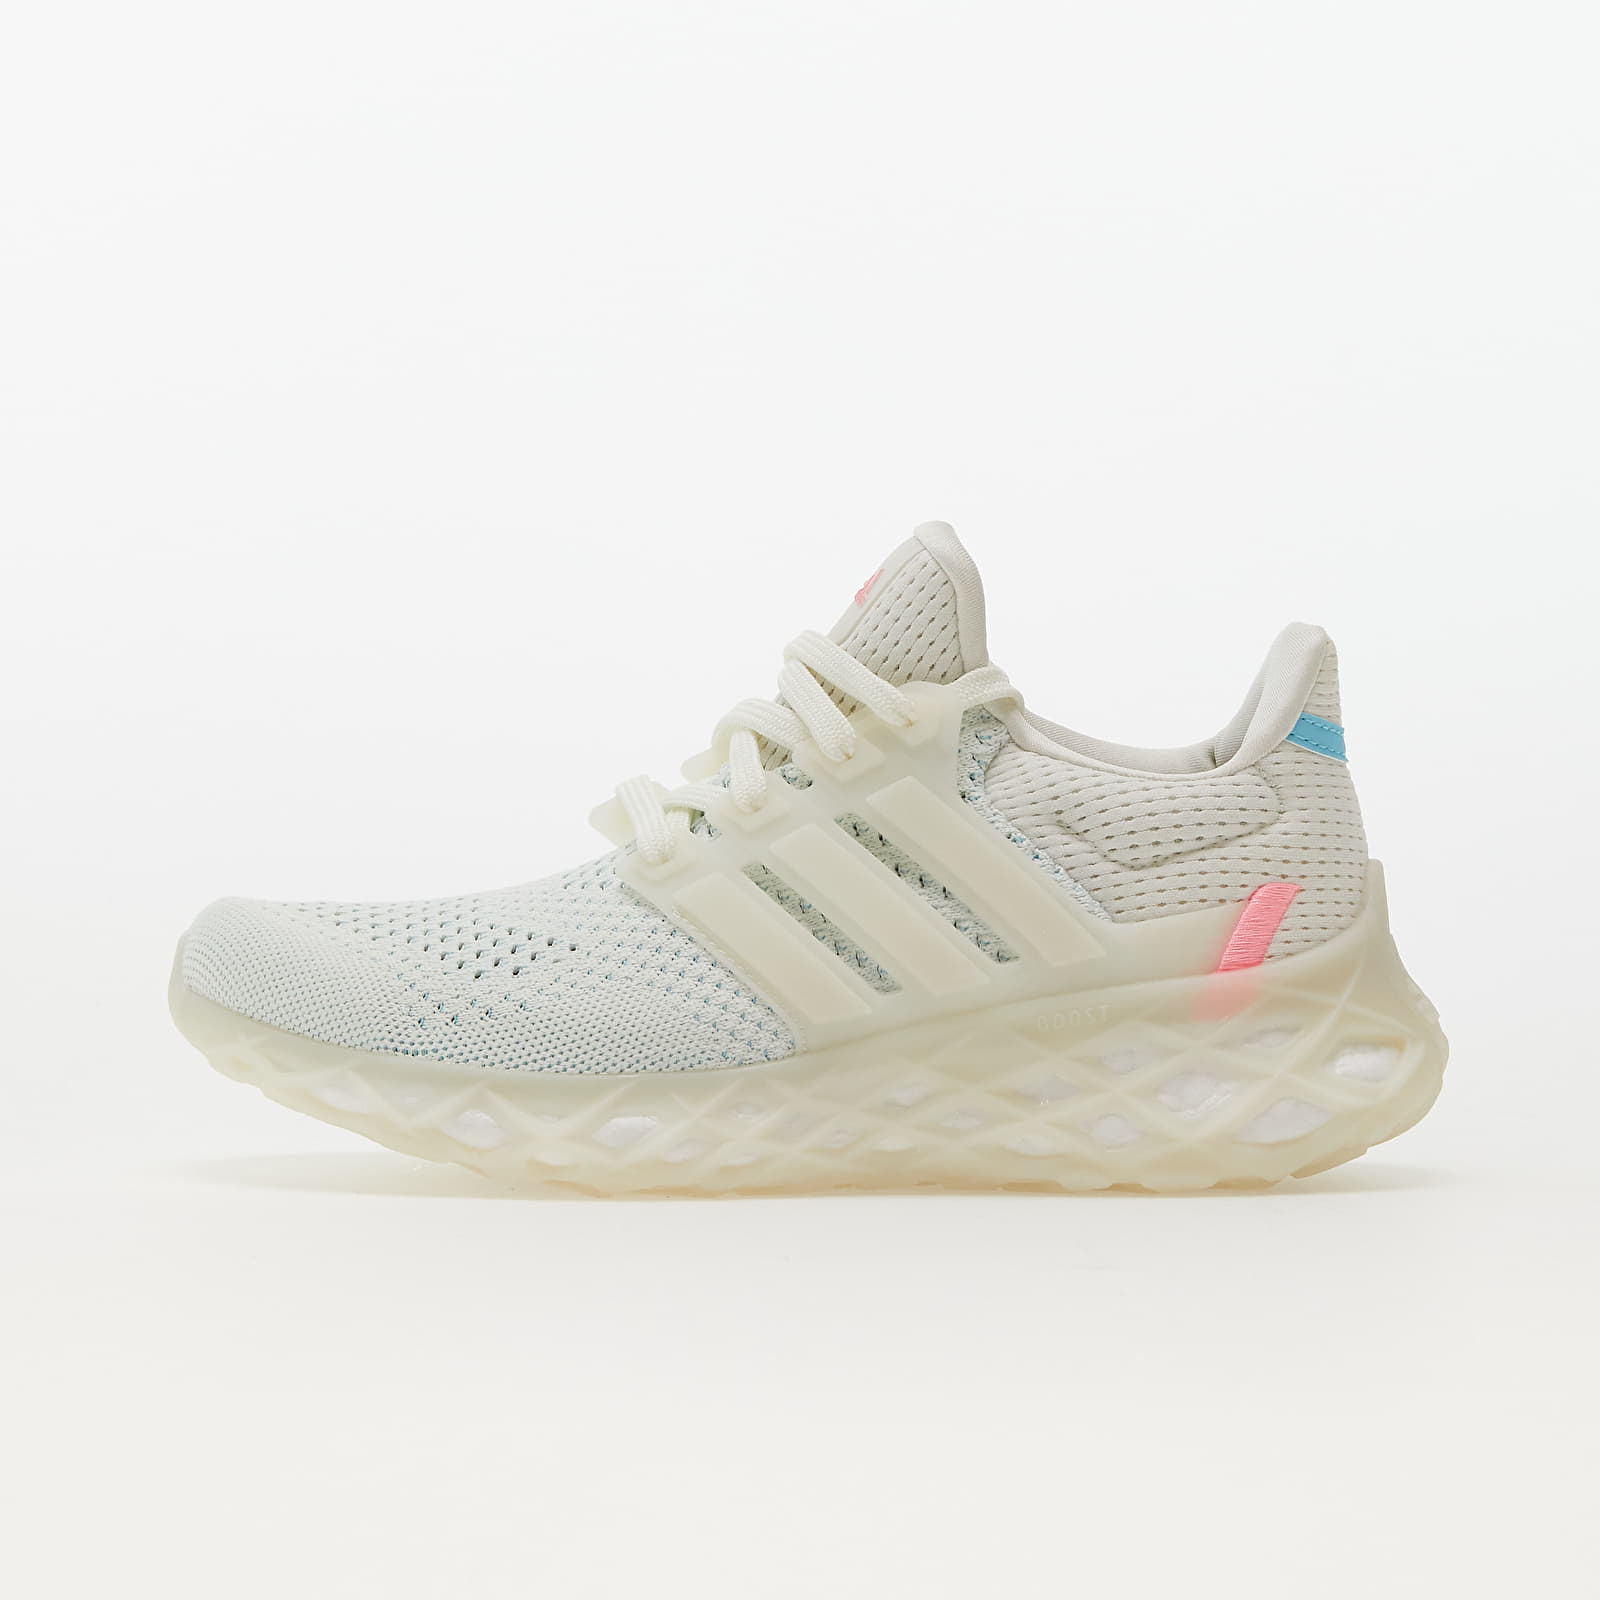 Women's shoes adidas UltraBOOST Web Dna Off White/ Off White/ Blitz Blue